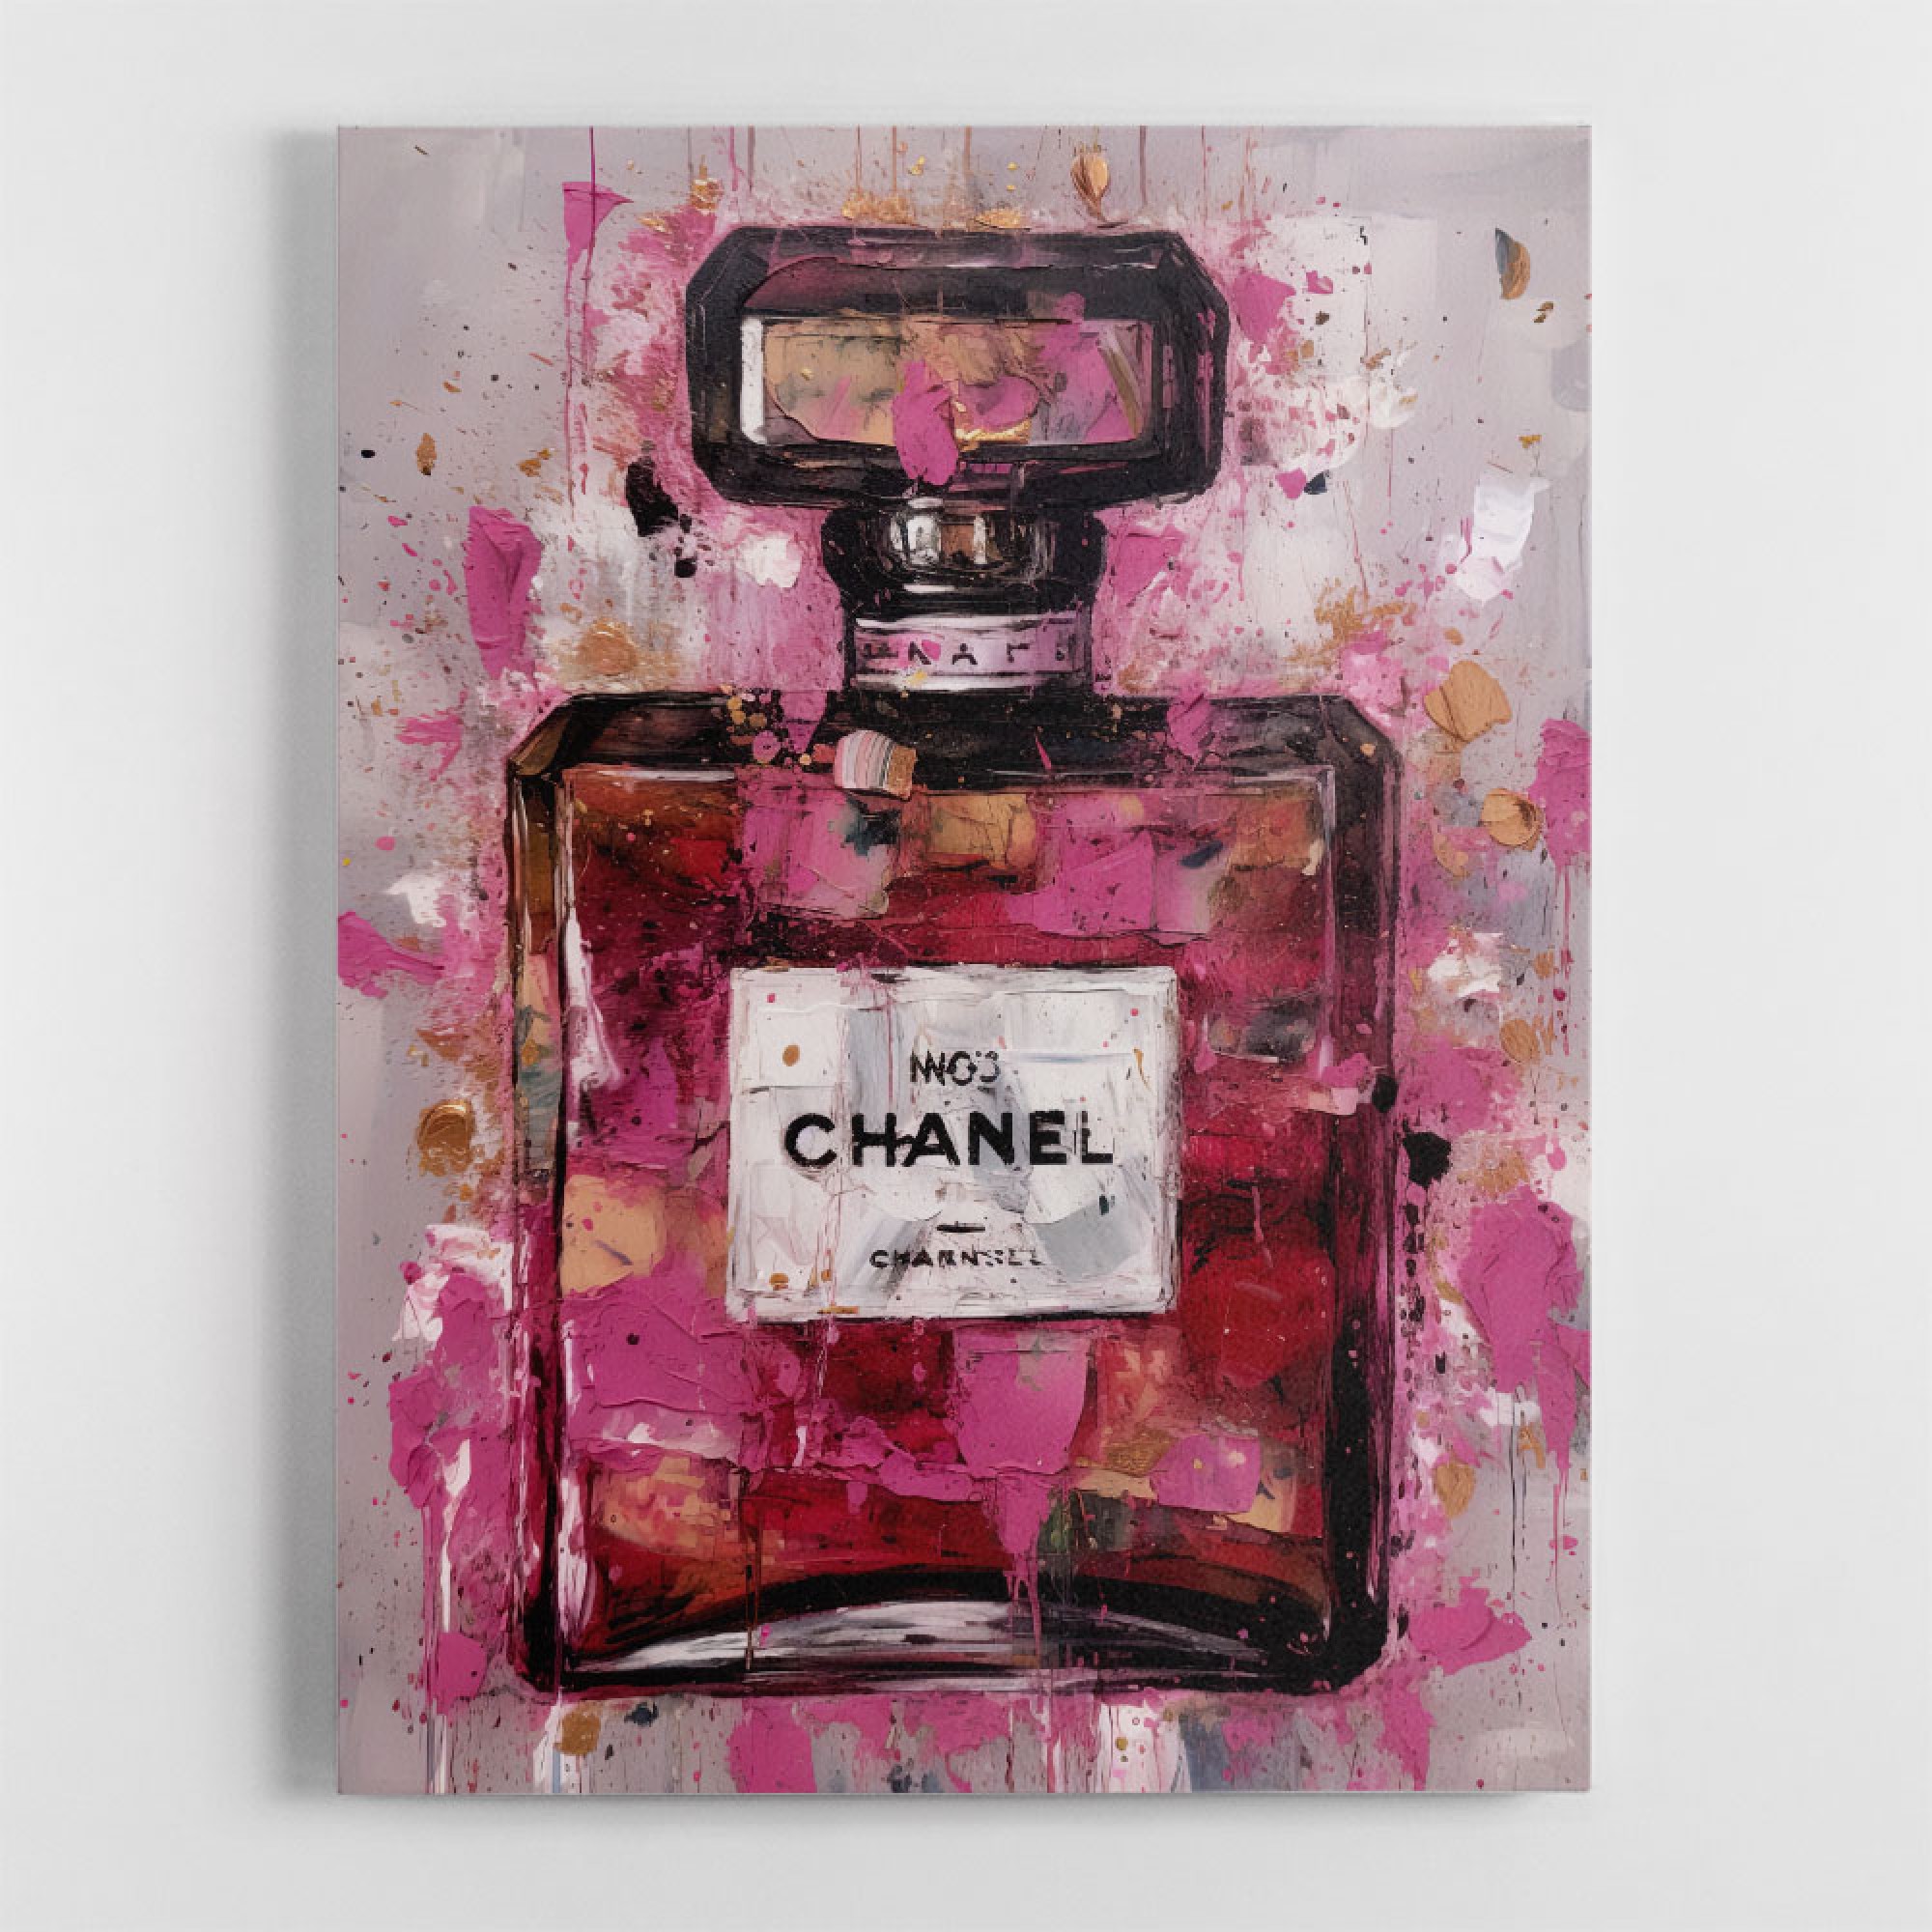 Chanel No 5 Perfume Bottle Pink Abstract Grunge Wall Art